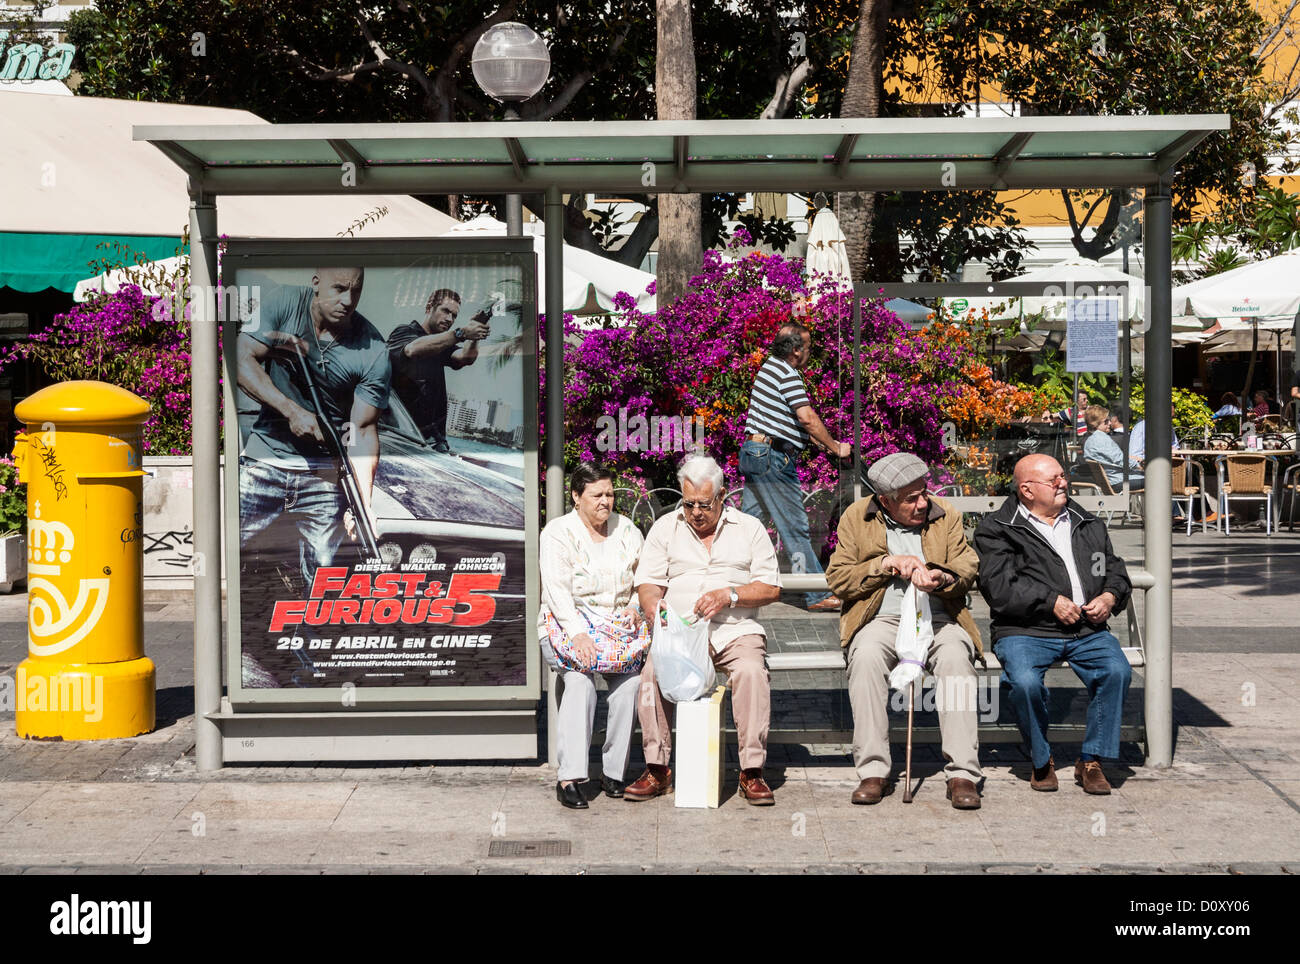 Elderly Spanish people at bust stop alongside Fast and Furios 5 film poster Stock Photo